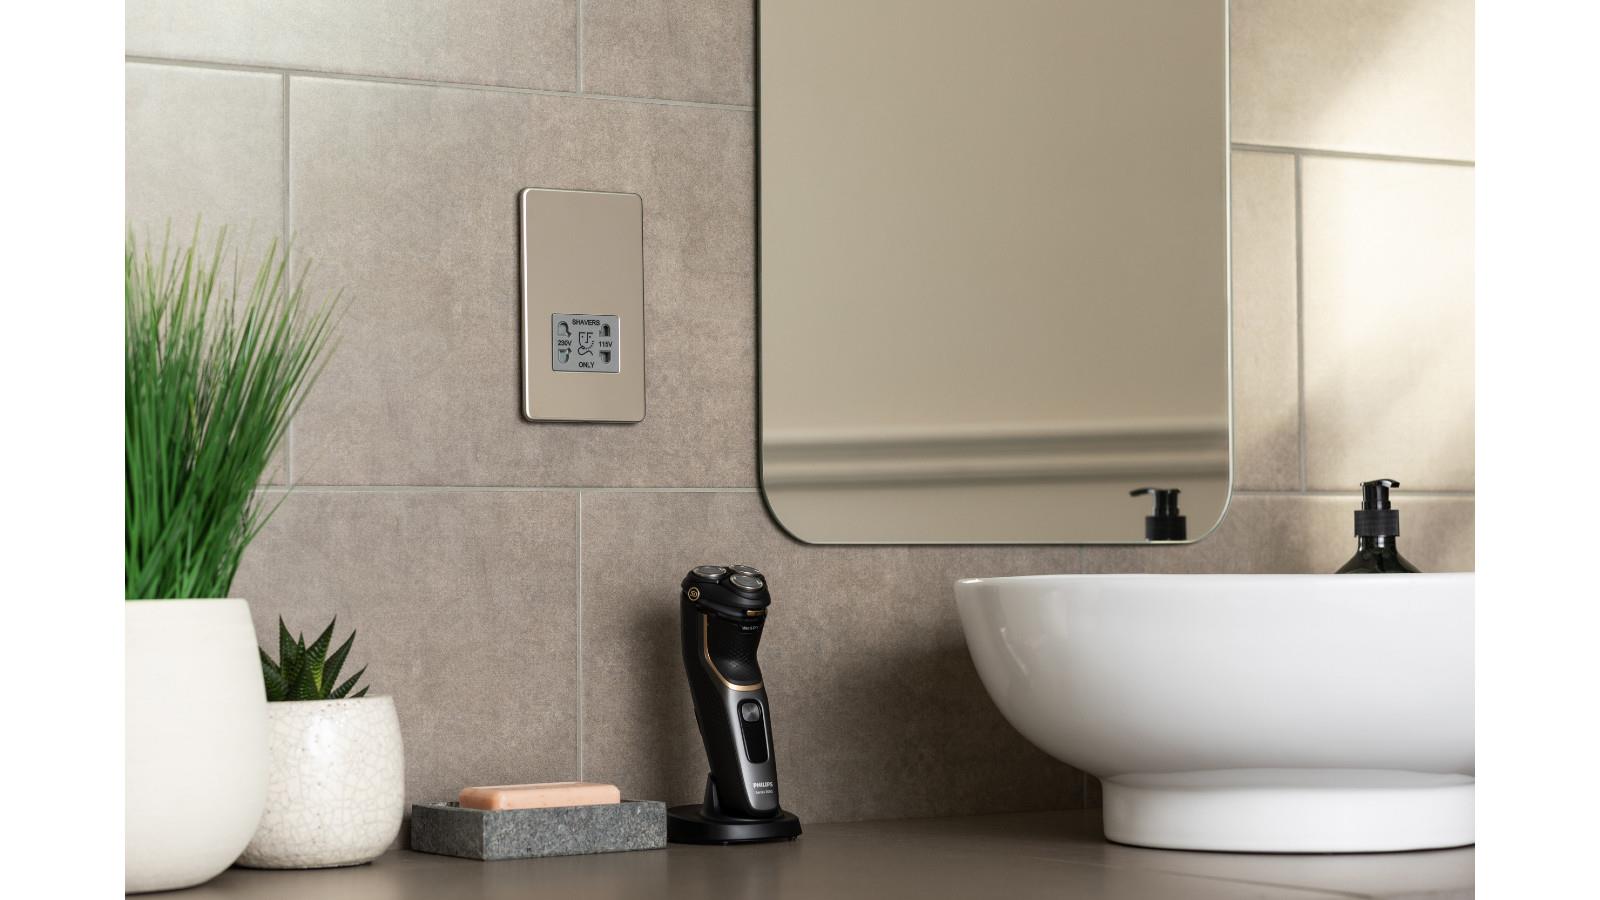 Scrub up nicely with Knightsbridge bathroom accessories image